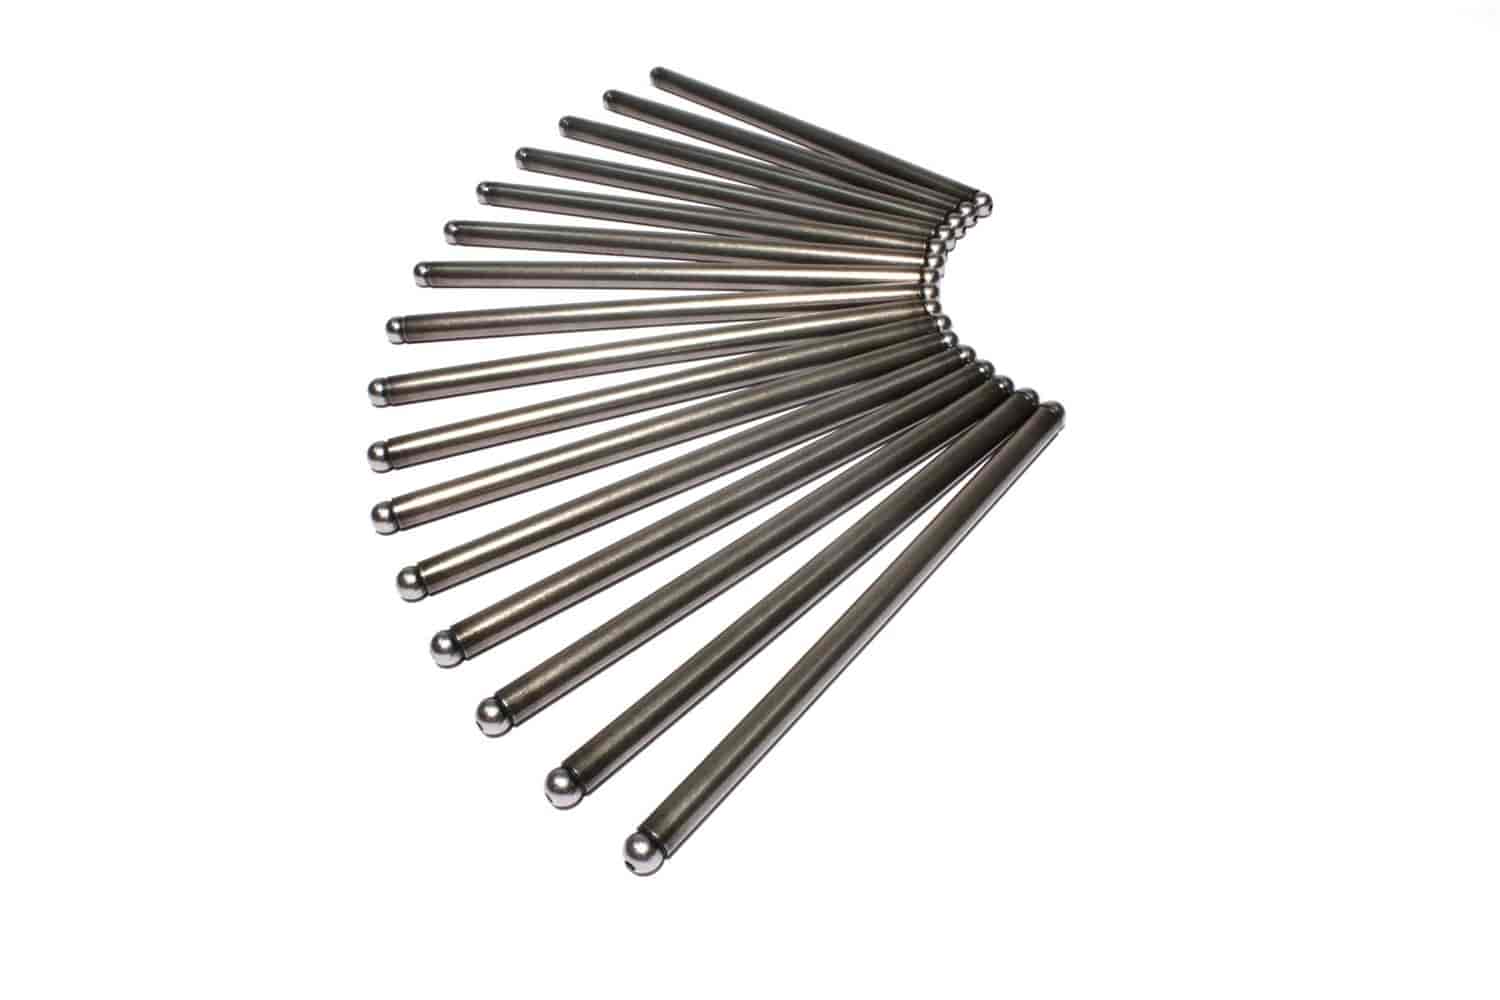 High Energy Pushrod Set Ford 352-428ci " FE" 1965-72, Factory Non-Adjustable Rockers Only